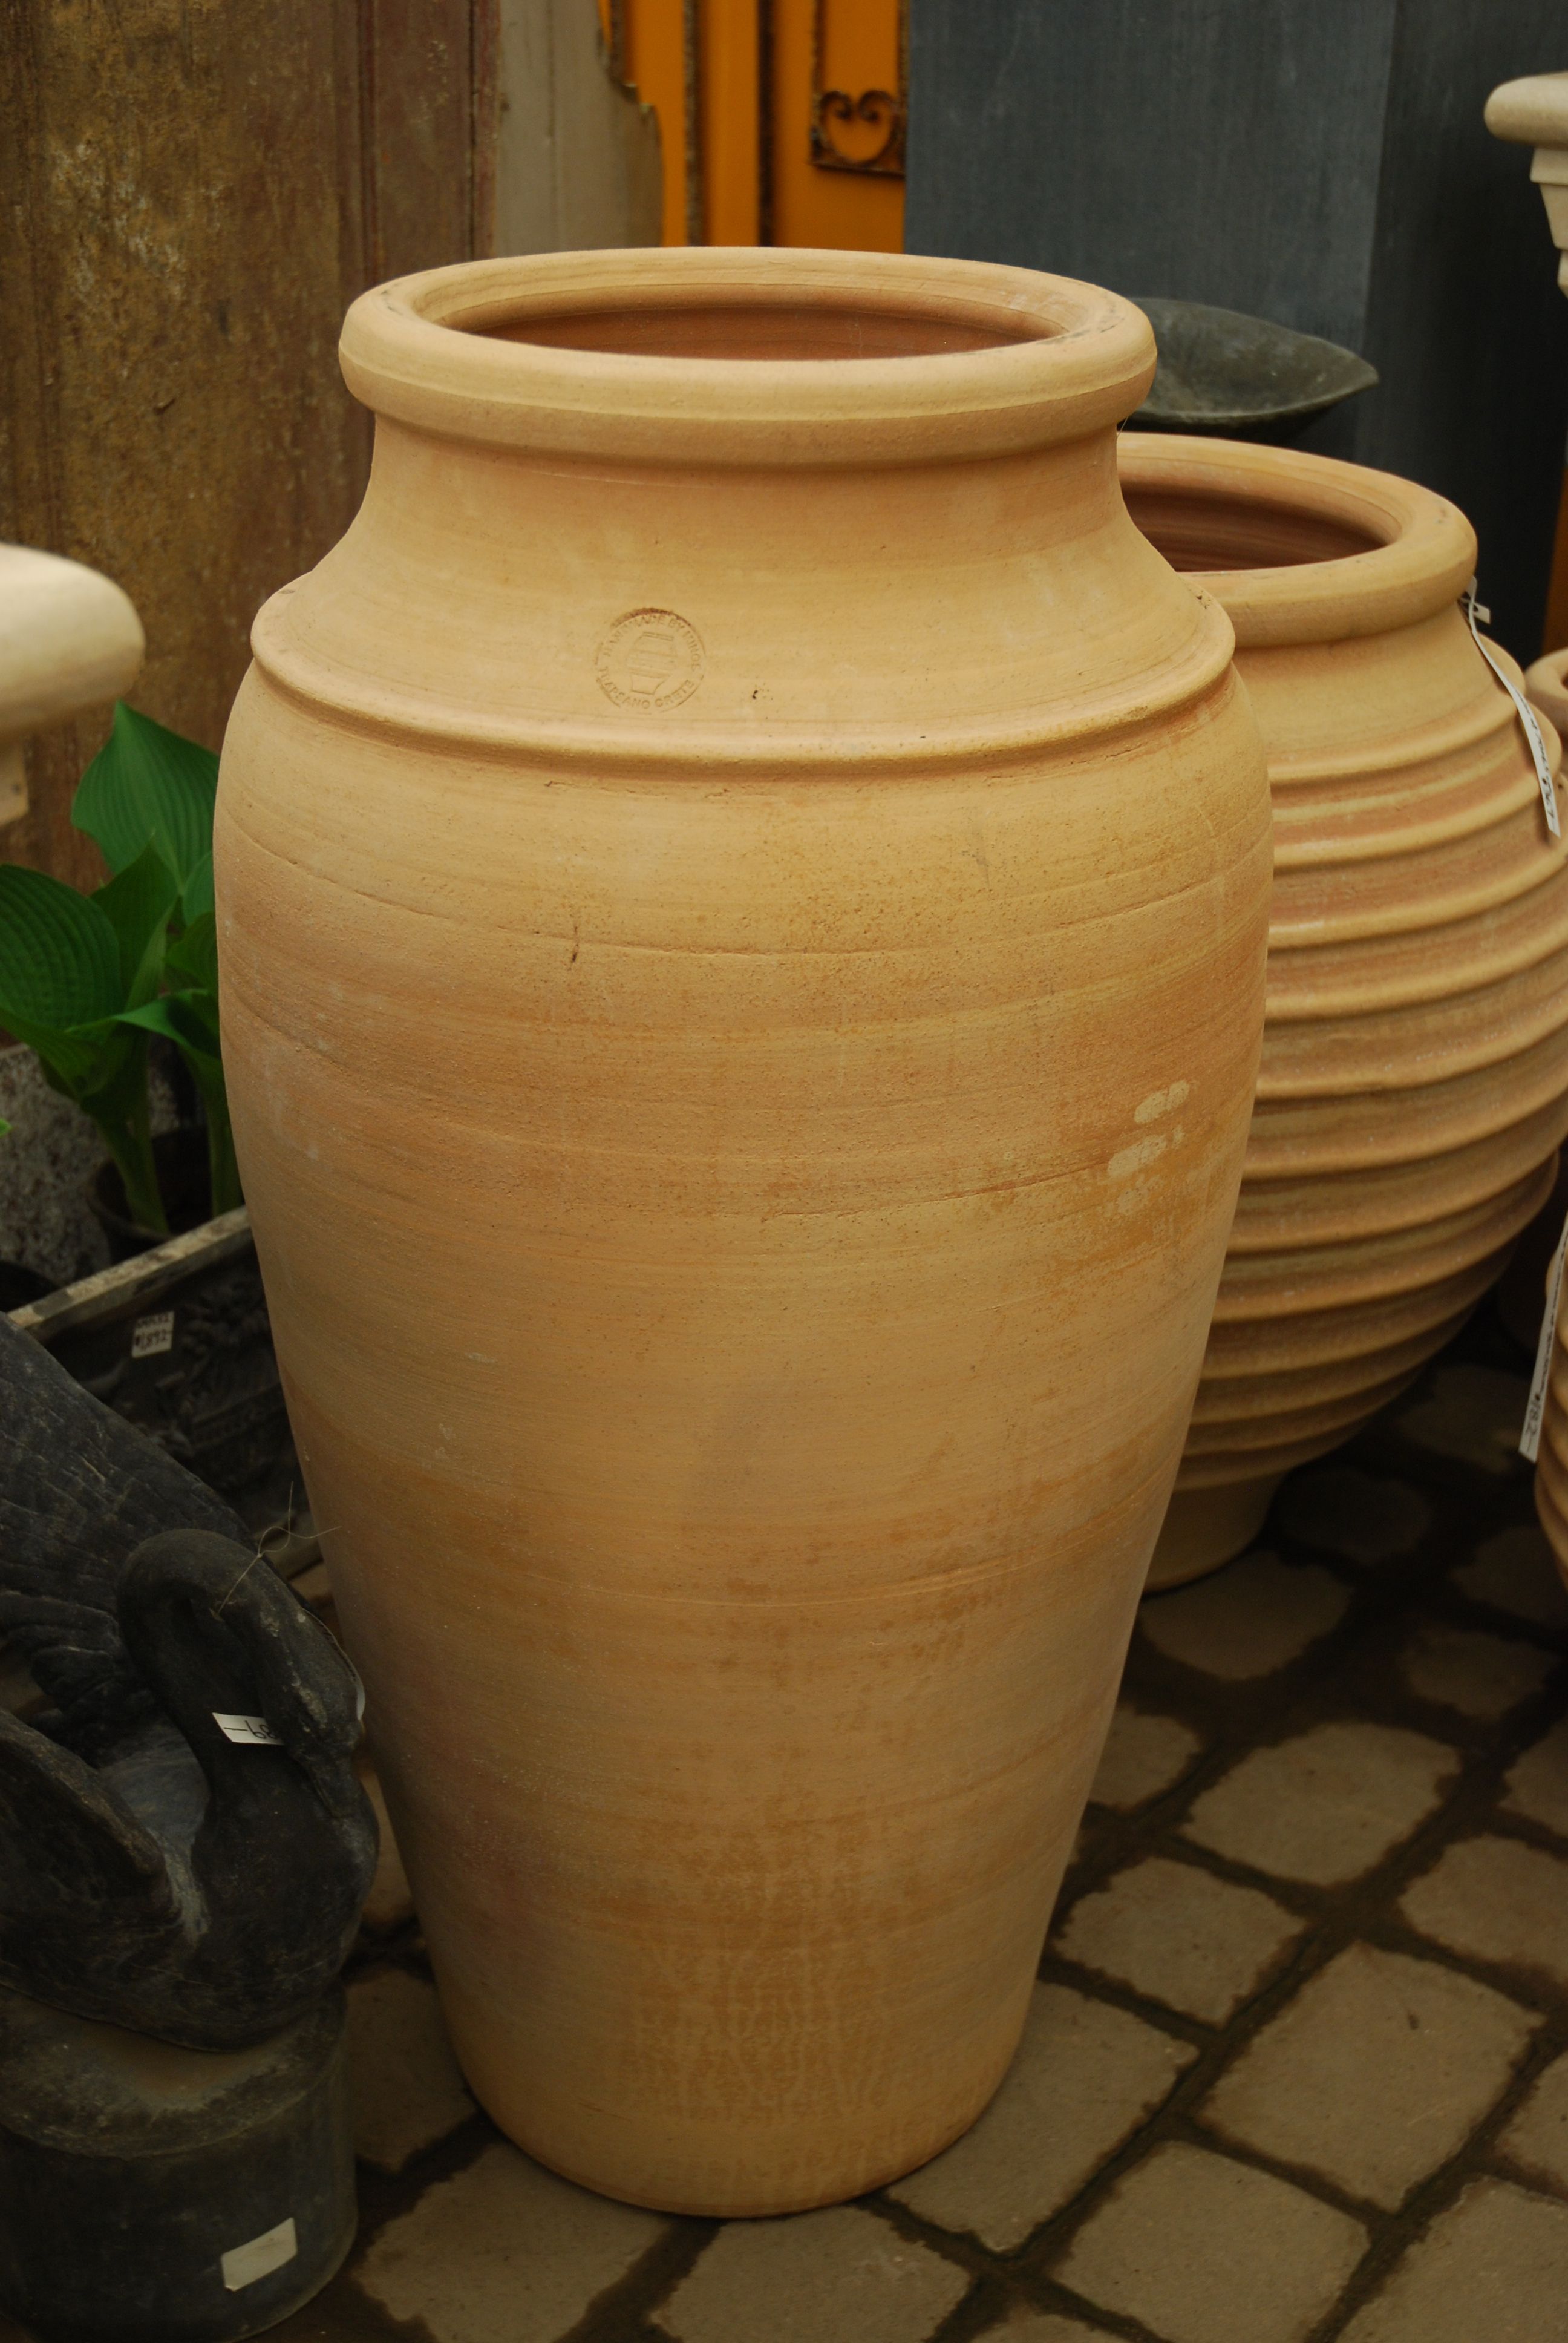 Our Italian Terracotta Inventory